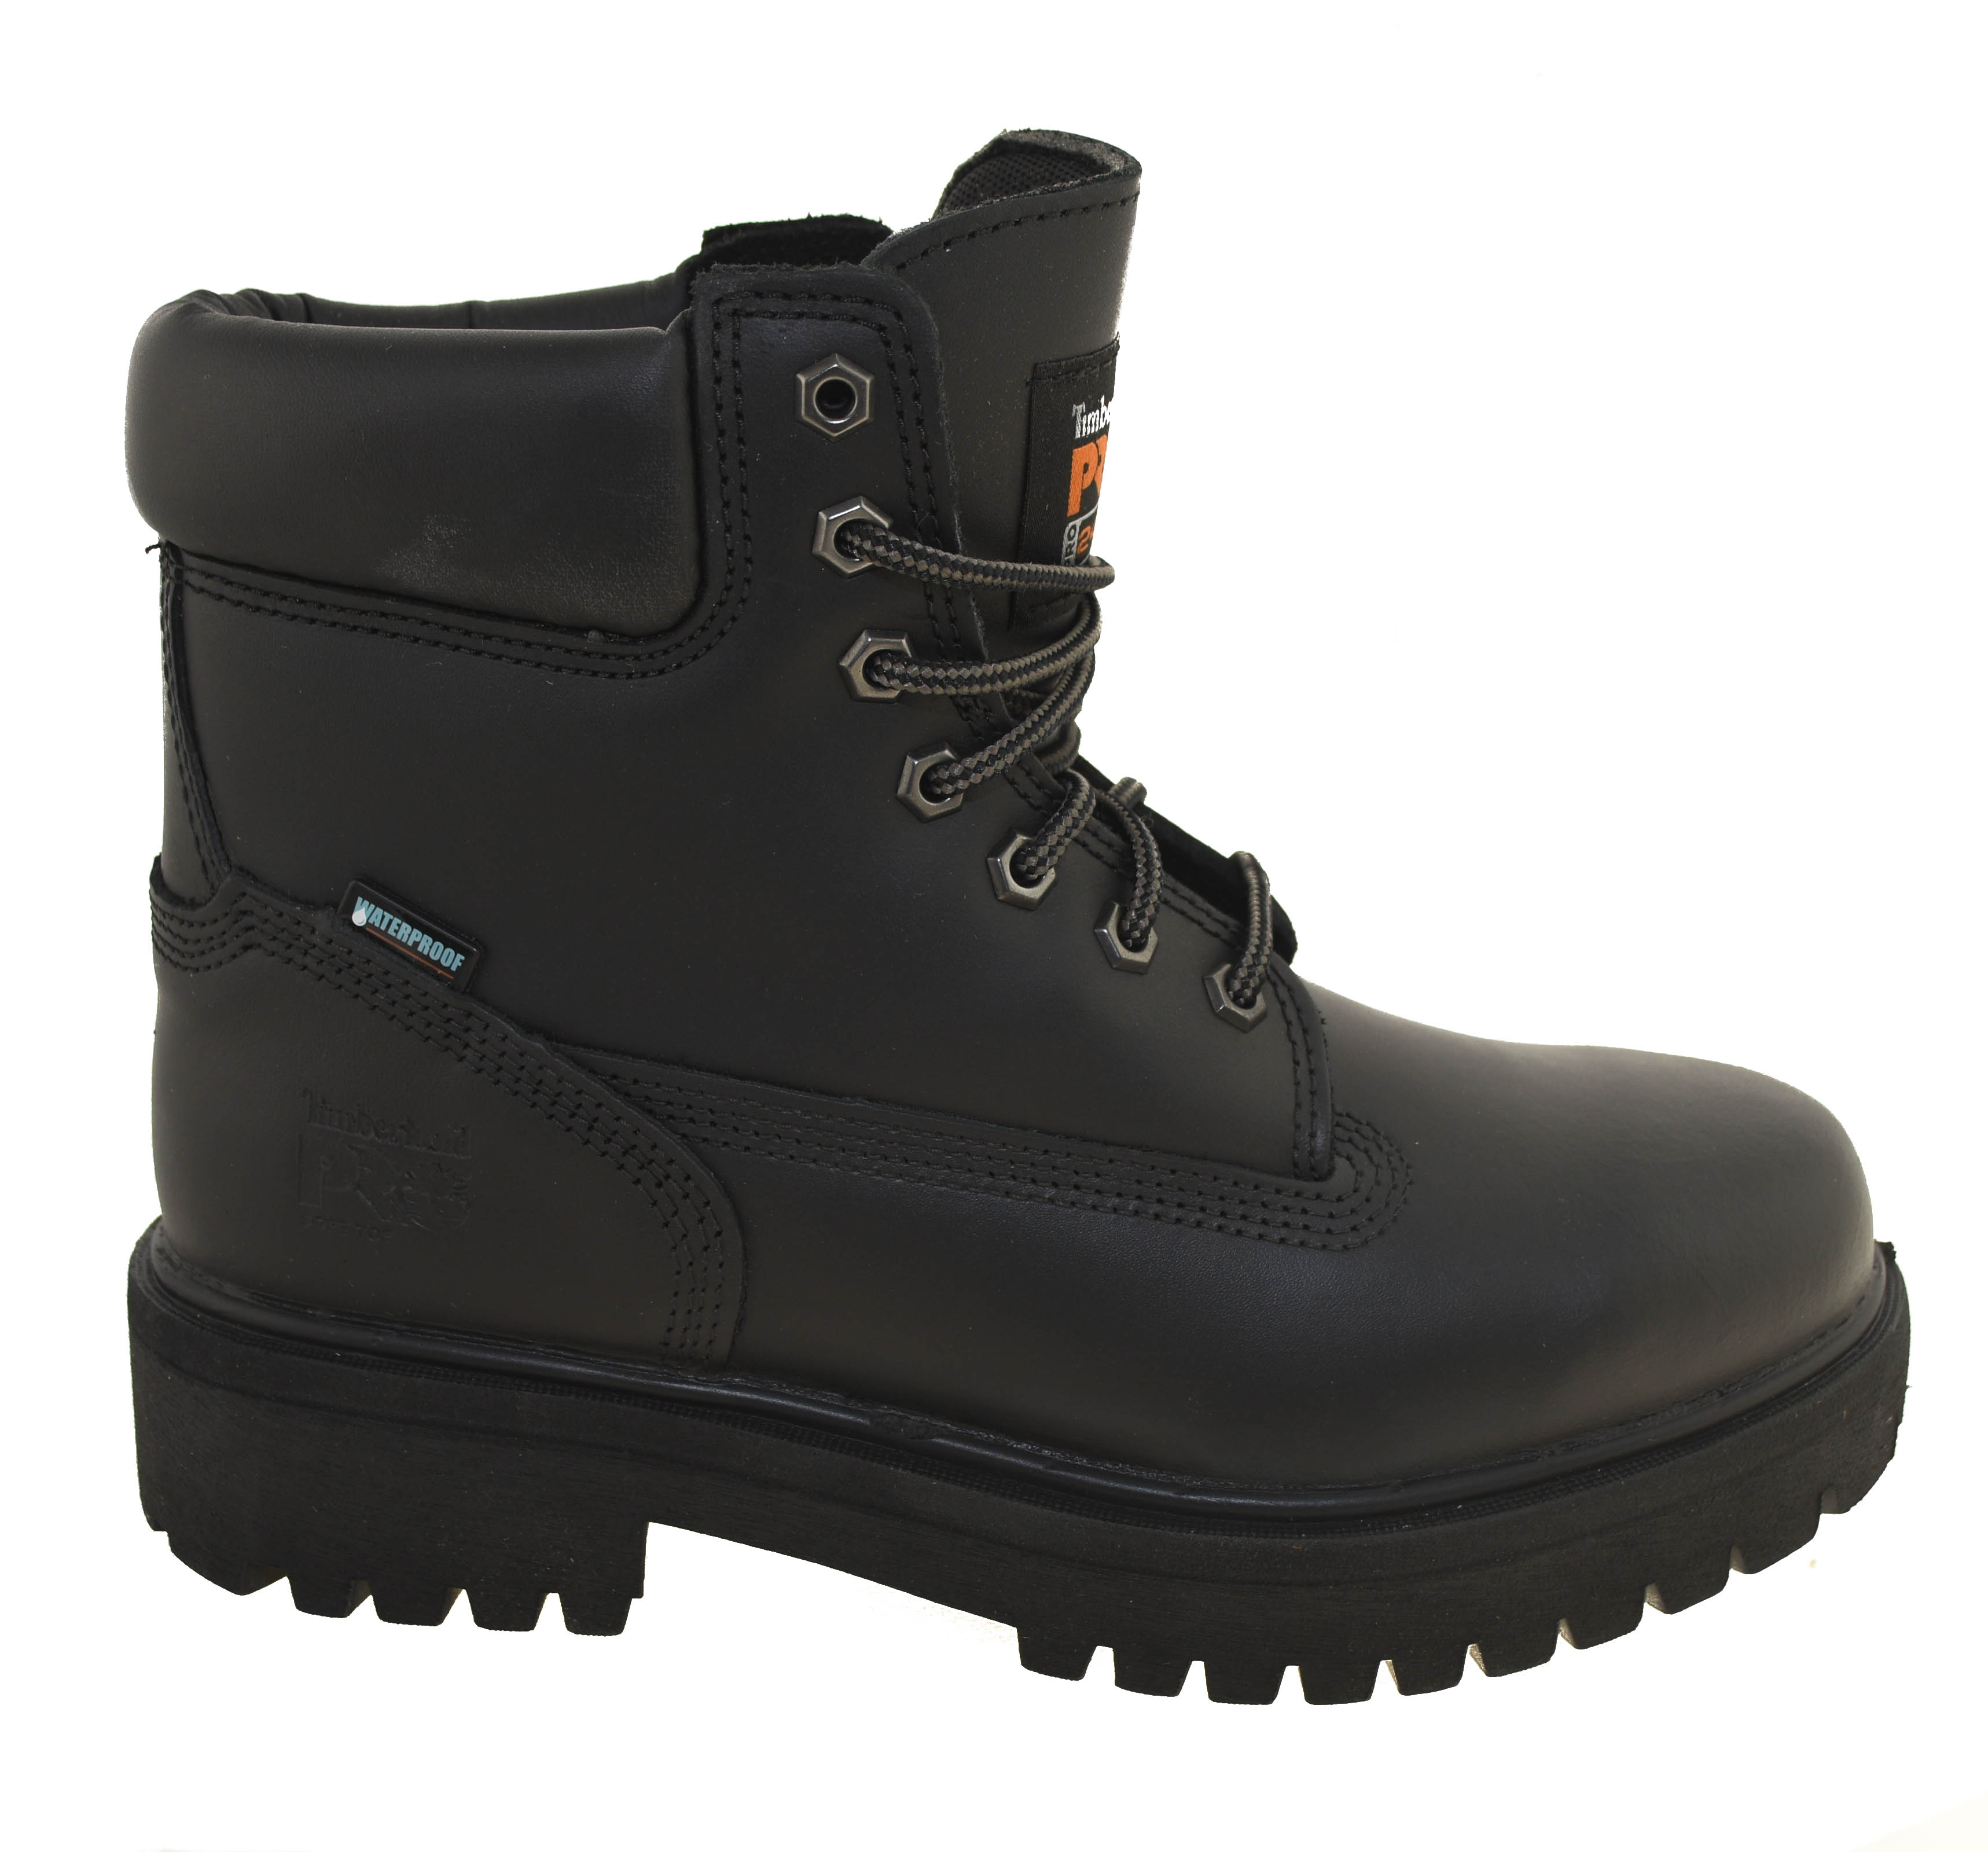 6 insulated work boots